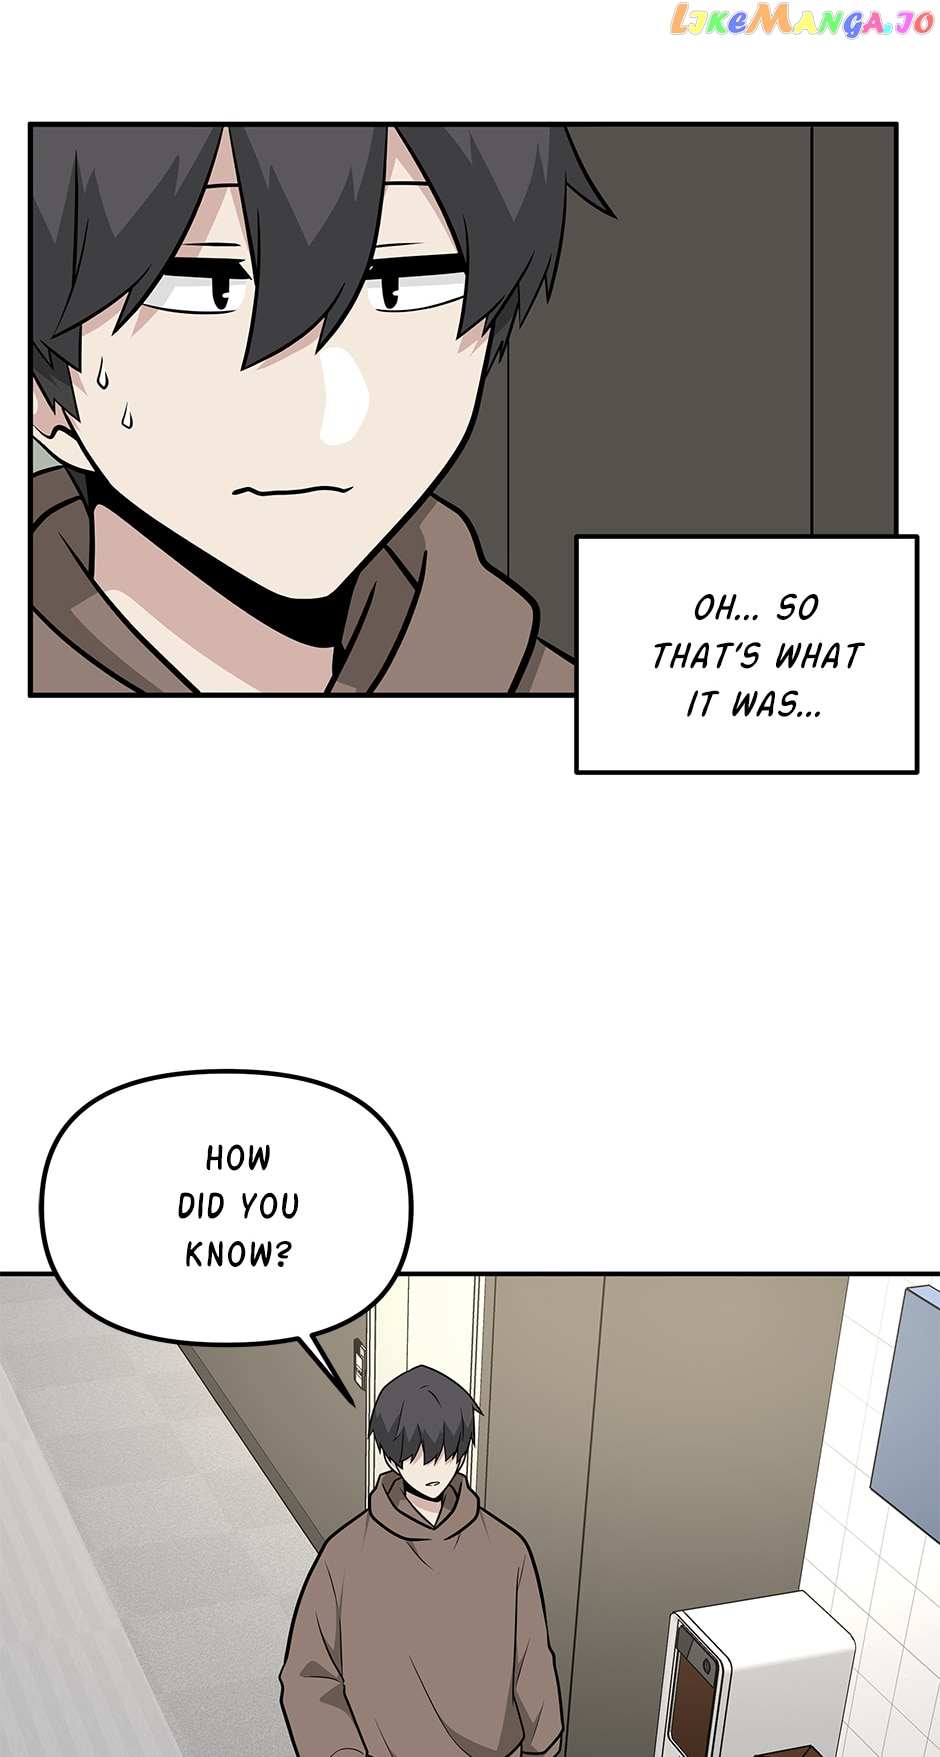 Where Are You Looking, Manager? - Page 3